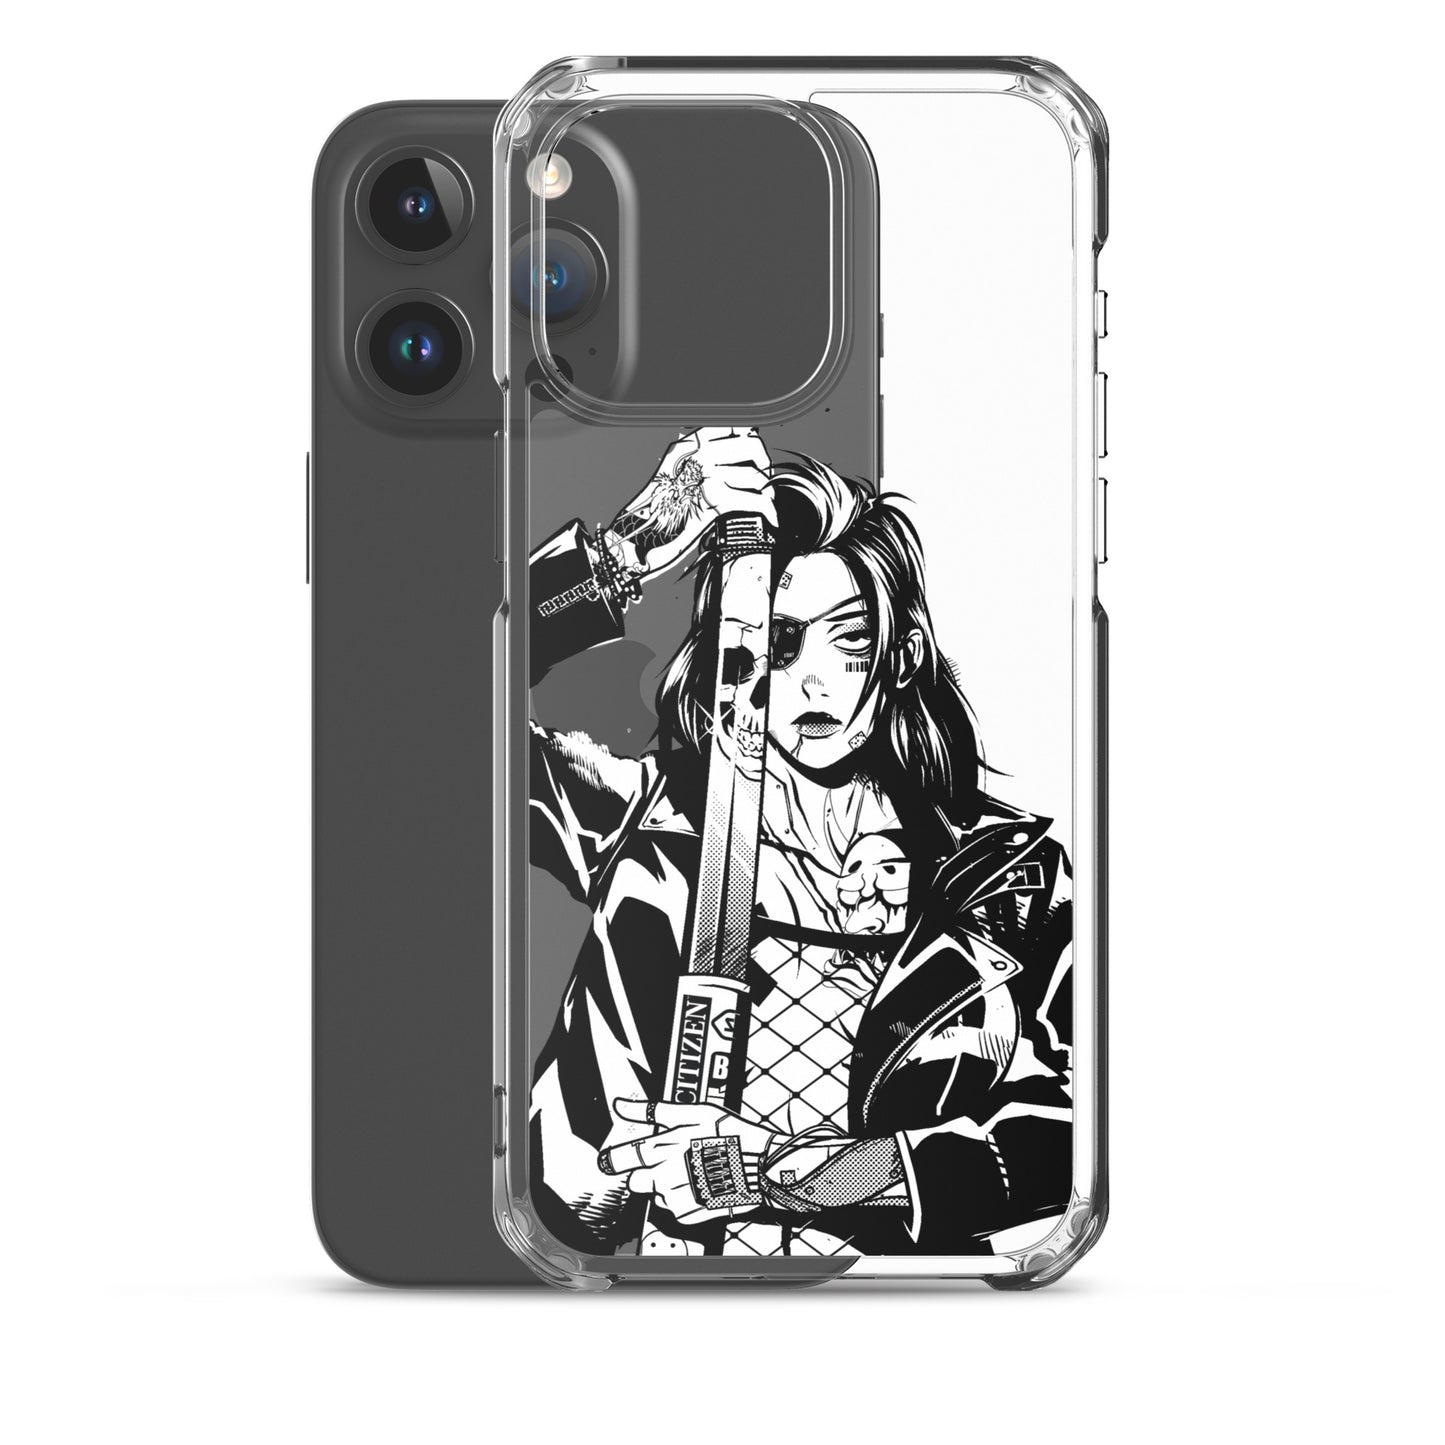 death cyber iphone case